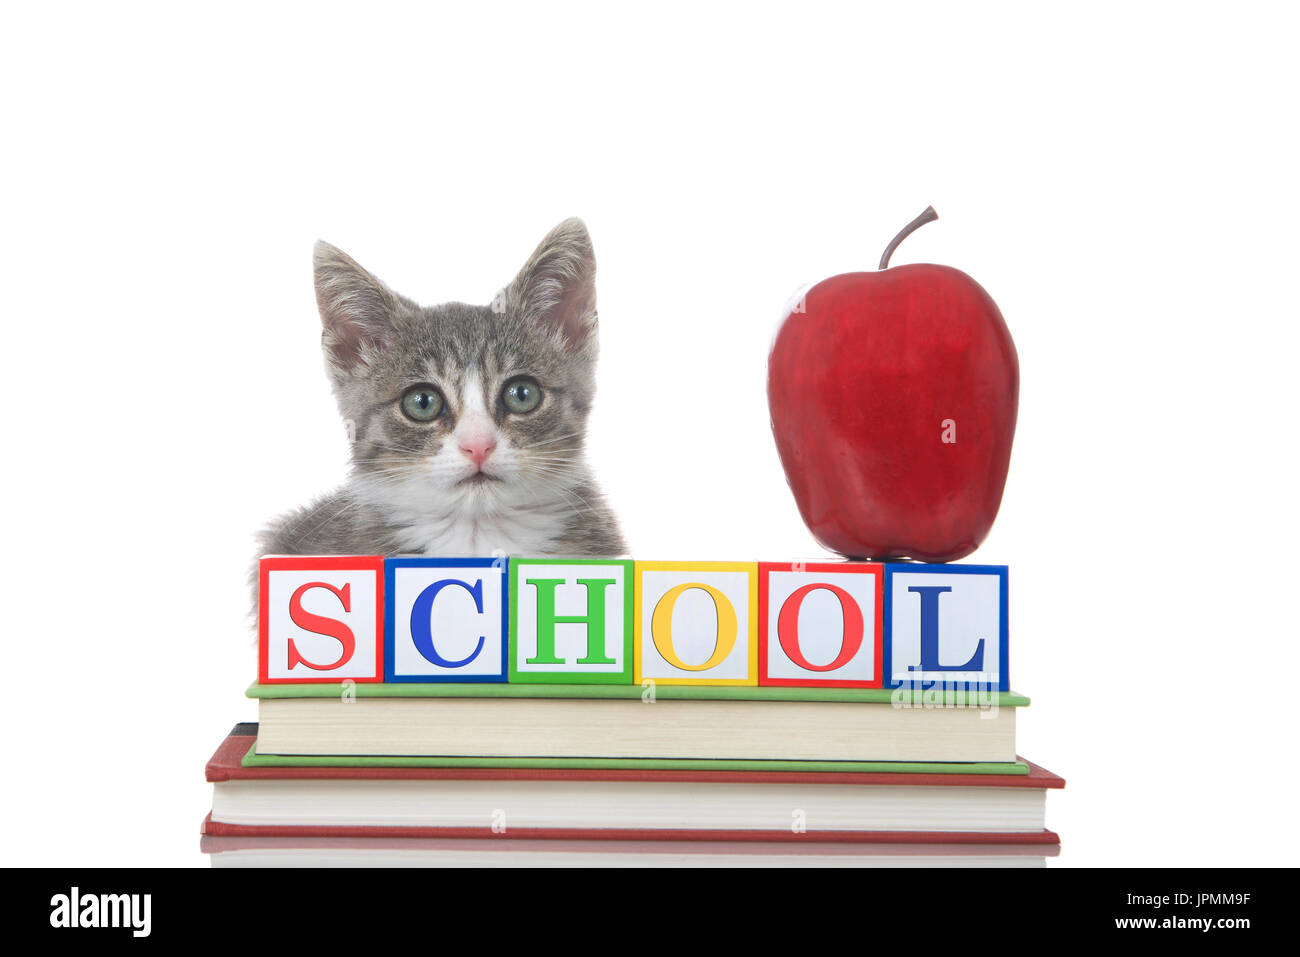 One small gray and white tabby kitten crouched on school books with colorful wood blocks, creating word school, apple sitting on top. Isolated on whit Stock Photo